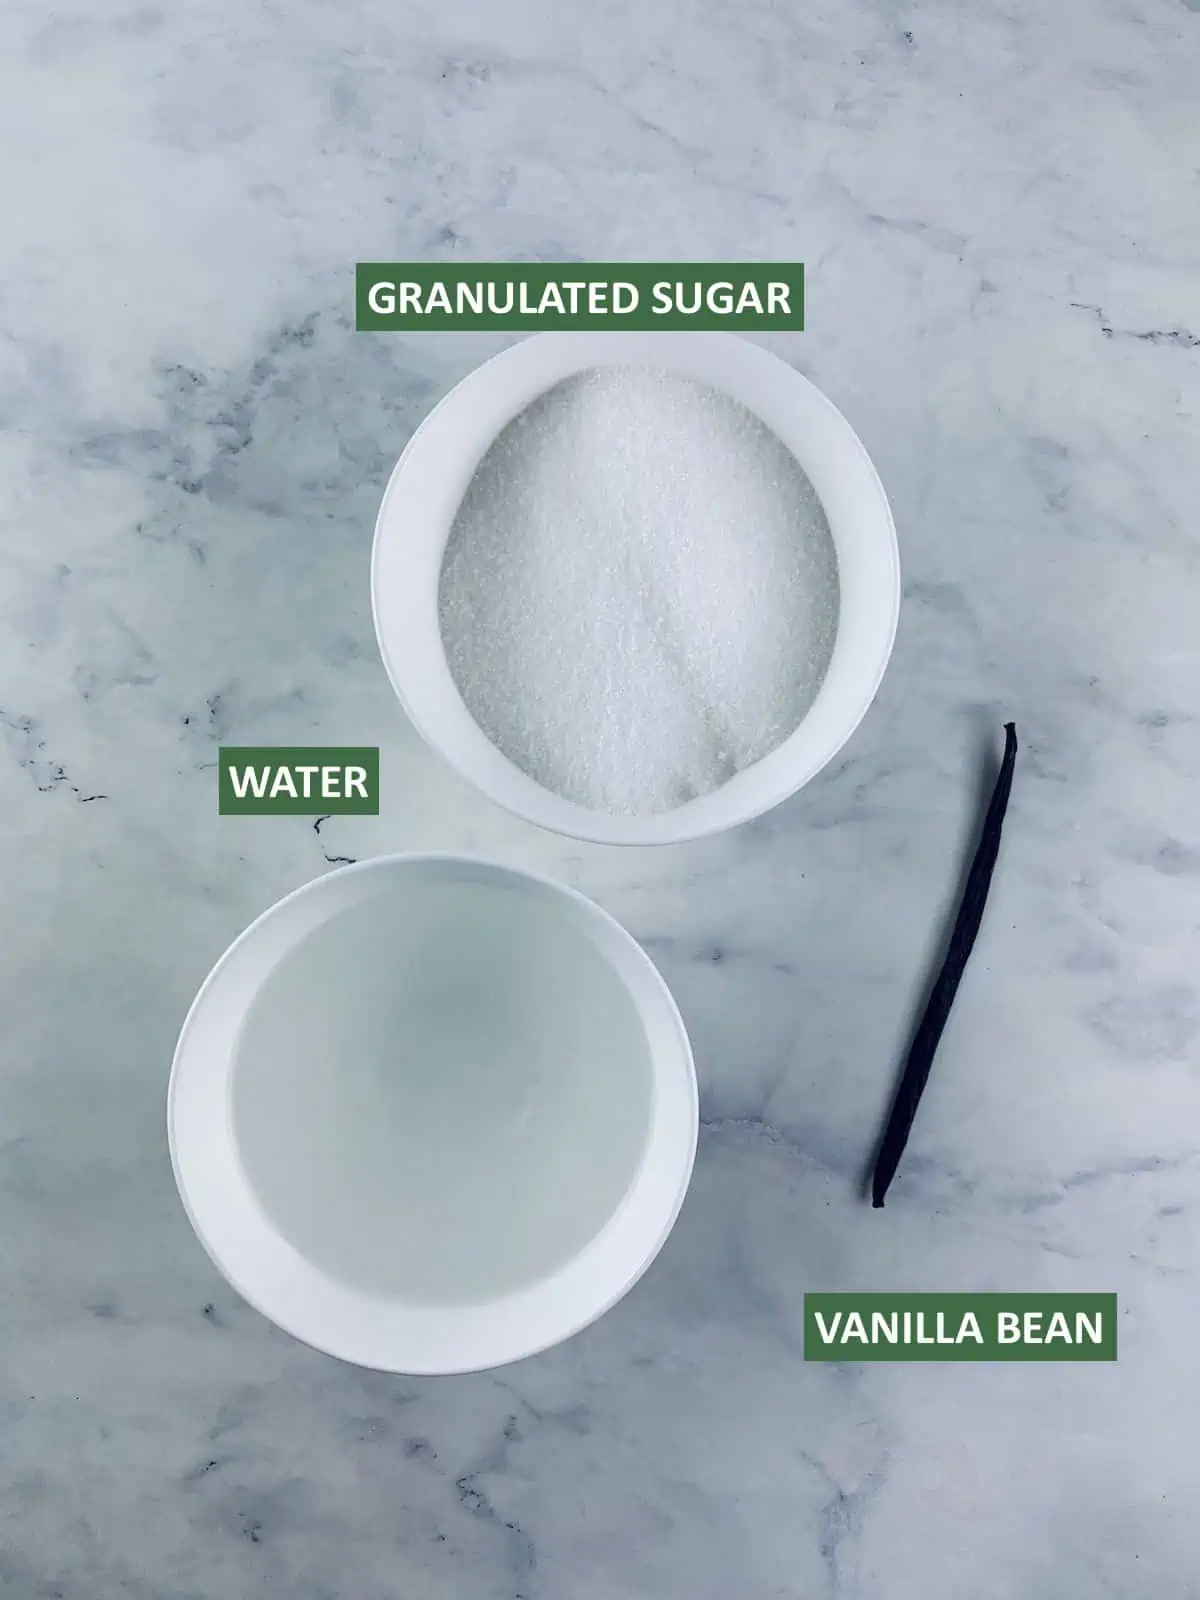 LABELLED INGREDIENTS NEEDED TO MAKE VANILLA BEAN SYRUP